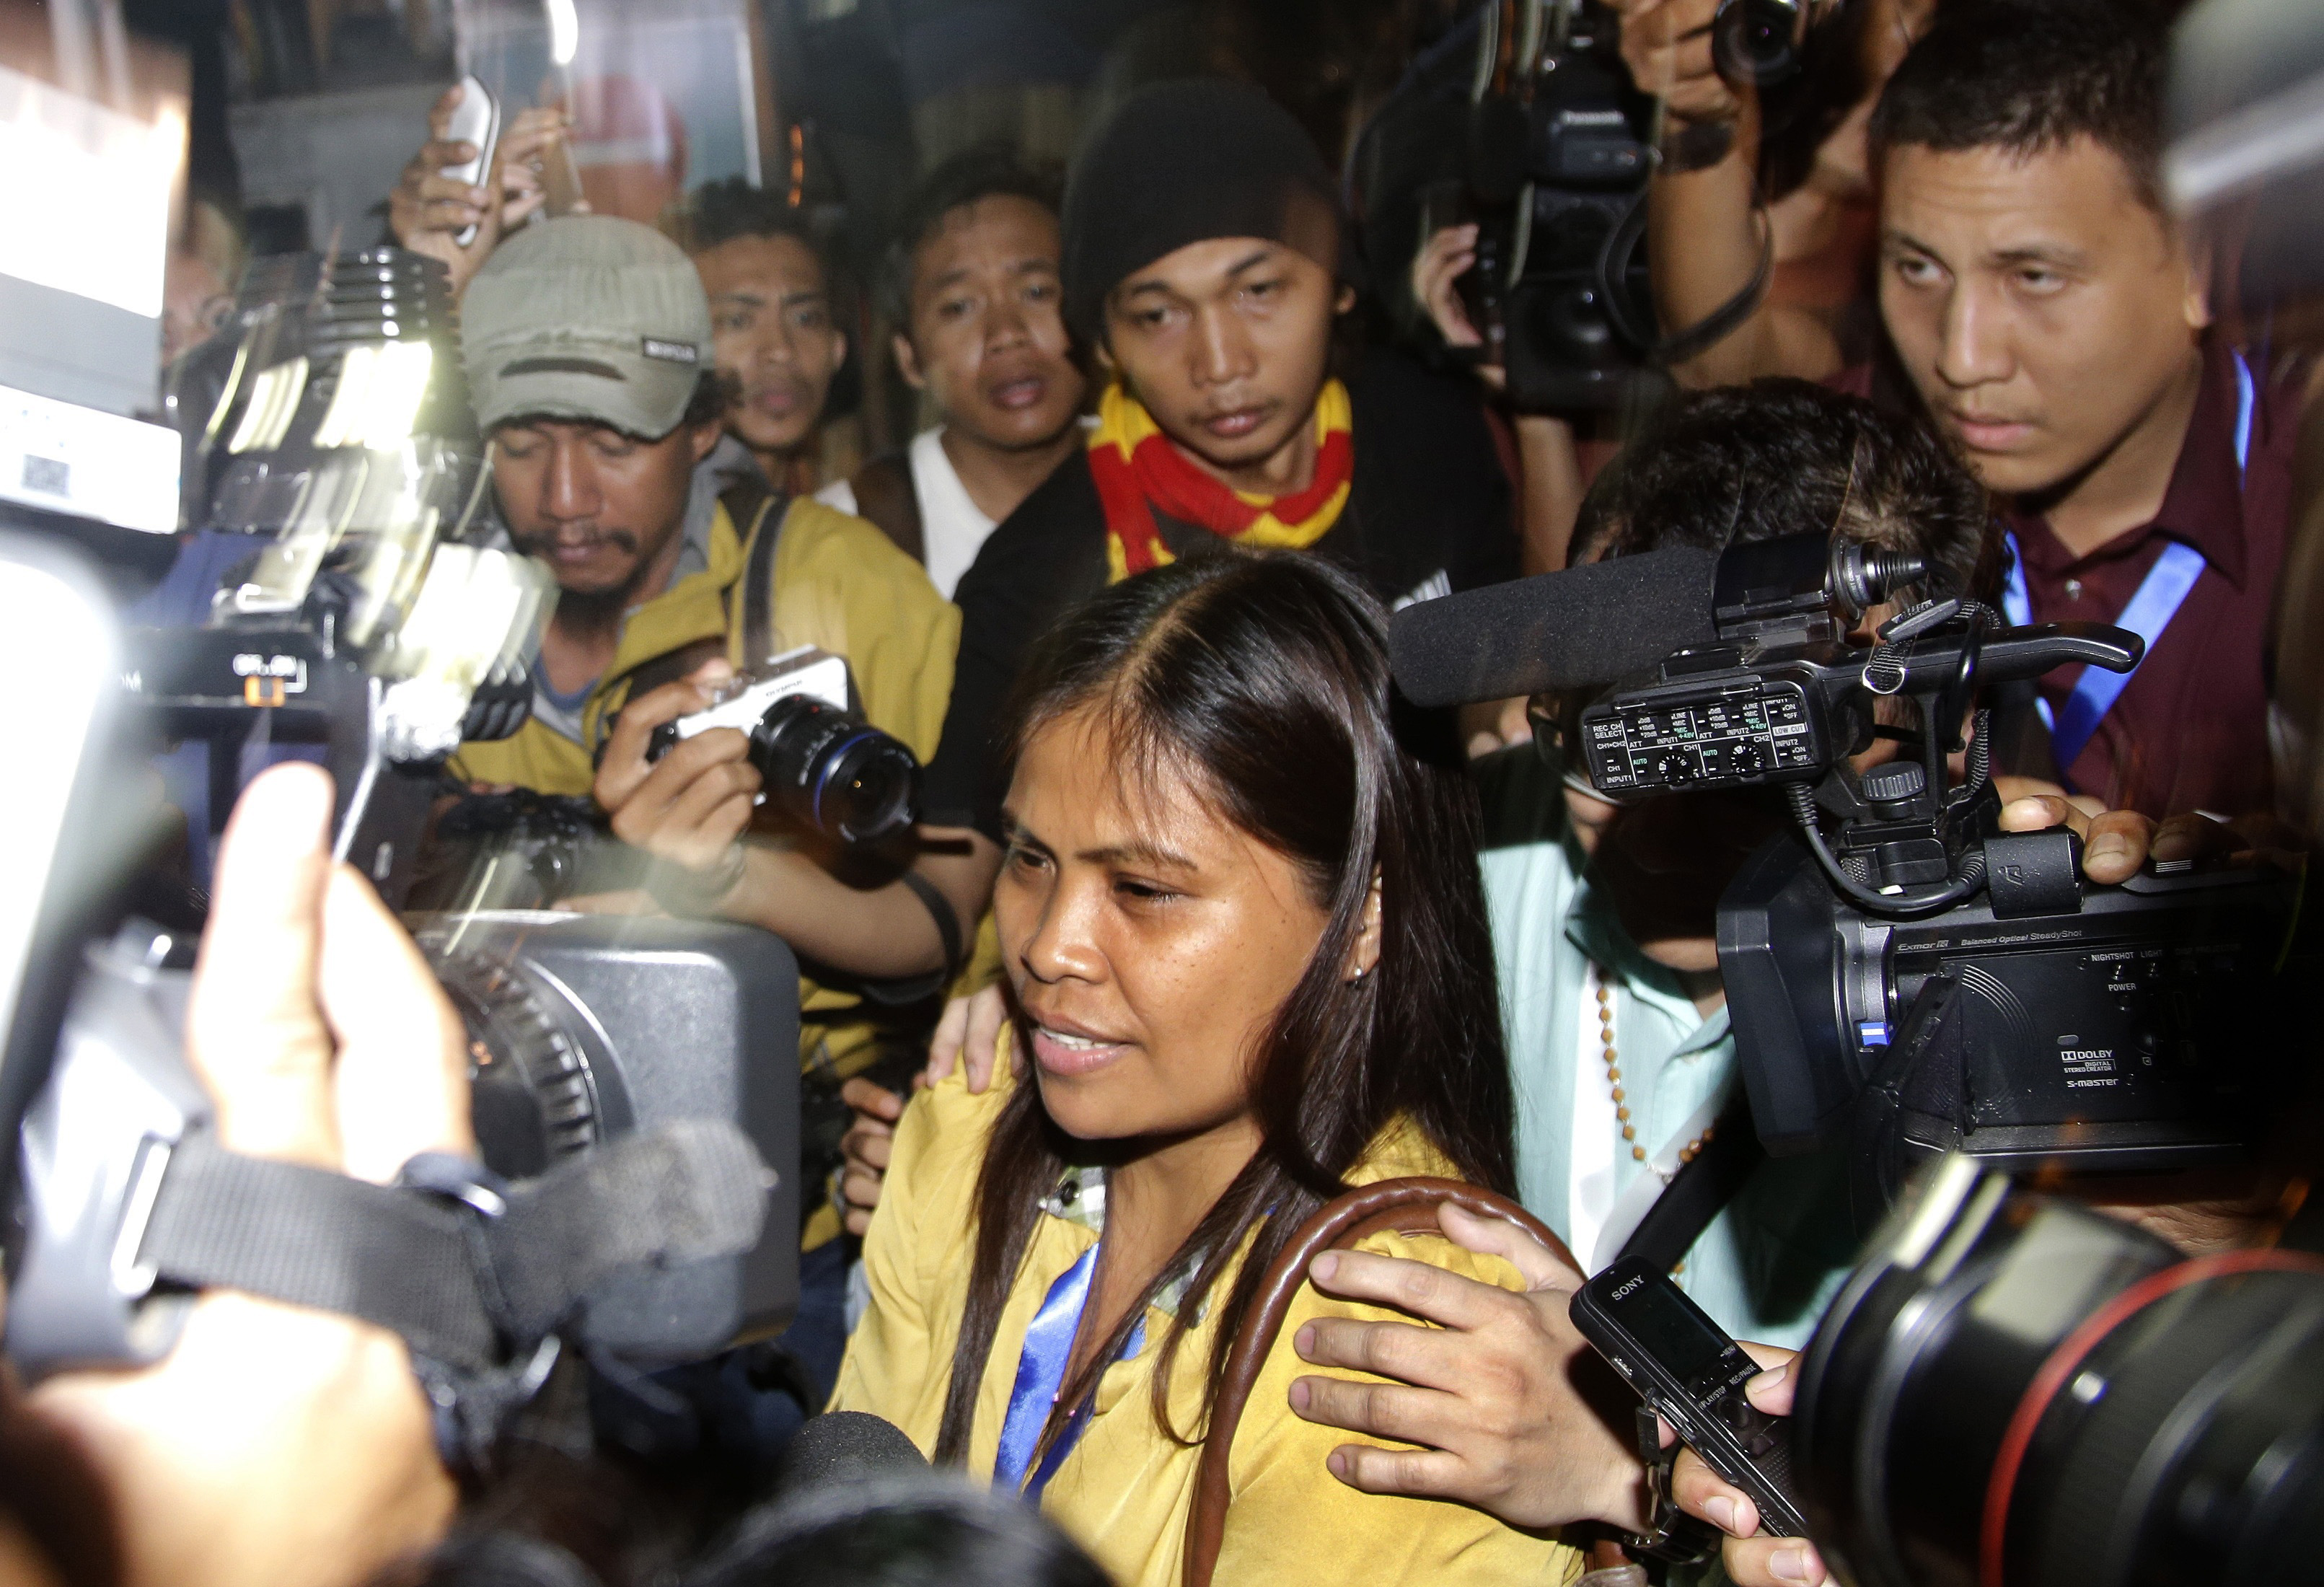 Marites Veloso, front center, sister of Filipina migrant worker on death row for drug offenses Mary Jane Veloso, is surrounded by media at Wijayapura port in Cilacap, Indonesia, after visiting her sister on April 29, 2015 (Tatan Syuflana—AP)